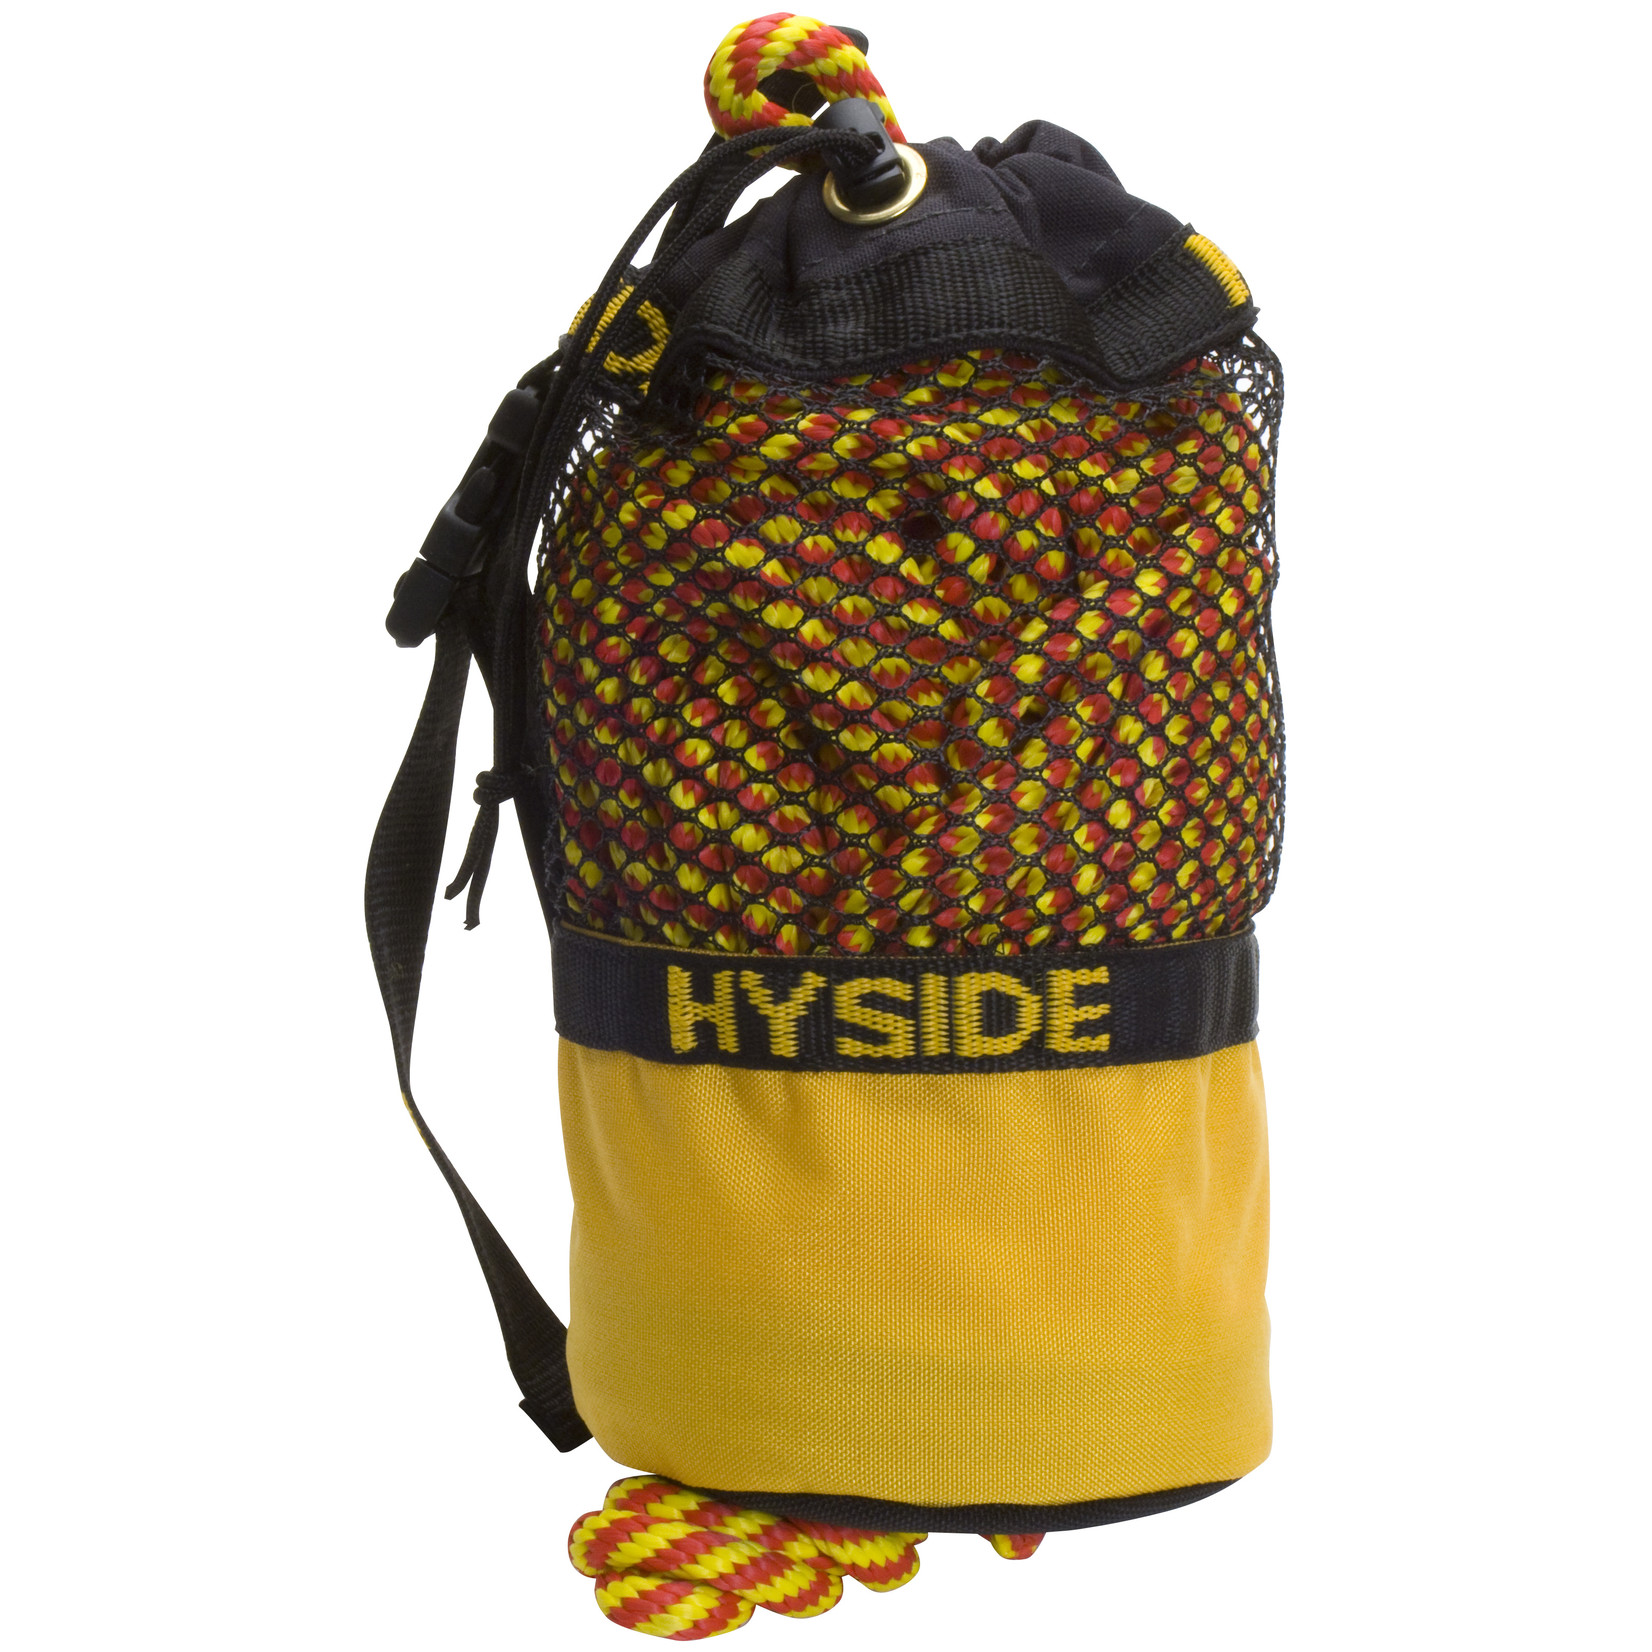 Rescue Throw Bag - No Rope | River Safety & Swiftwater Rescue Gear | Solgear